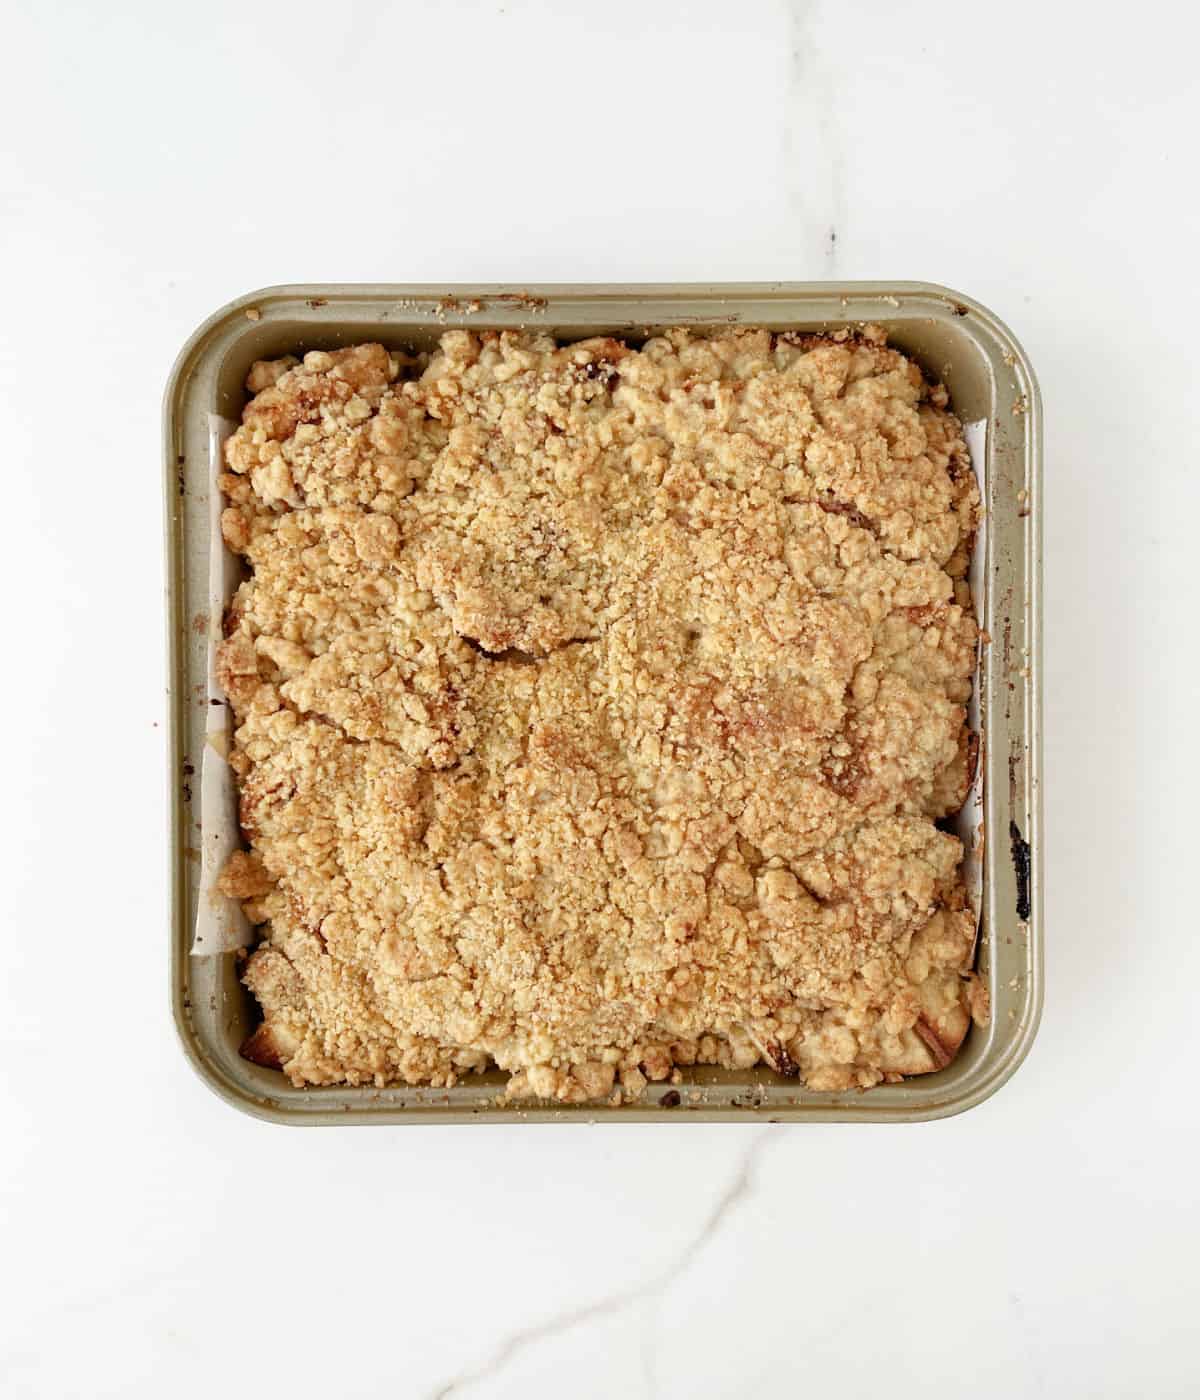 Top view of square pan with apple crumble on a white marble surface.